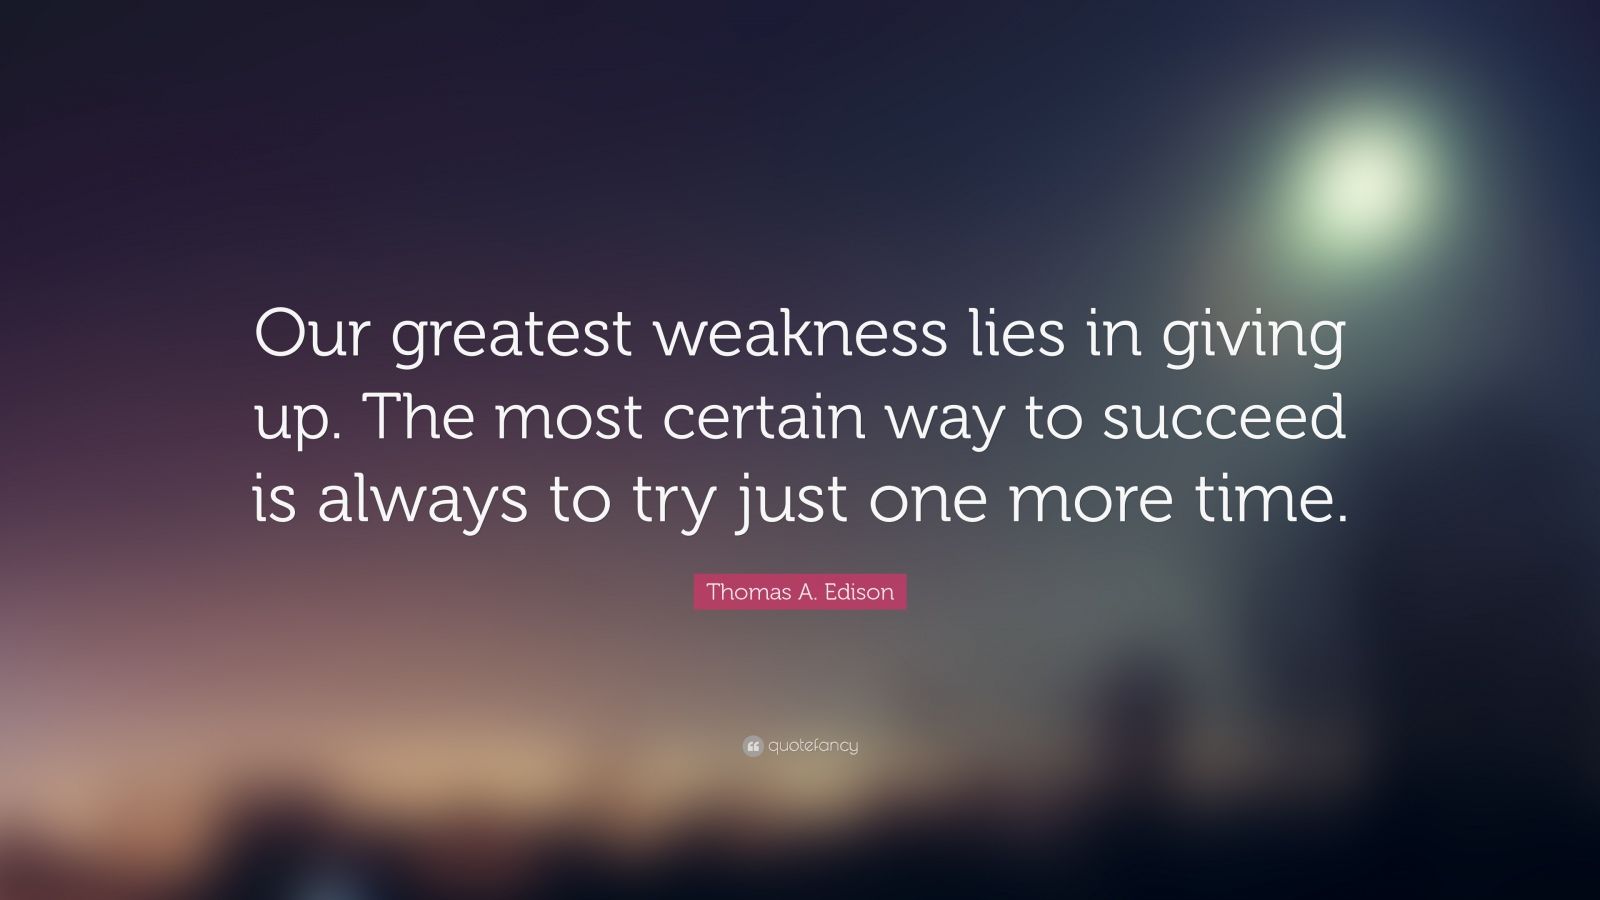 Thomas A. Edison Quote: “Our greatest weakness lies in giving up. The